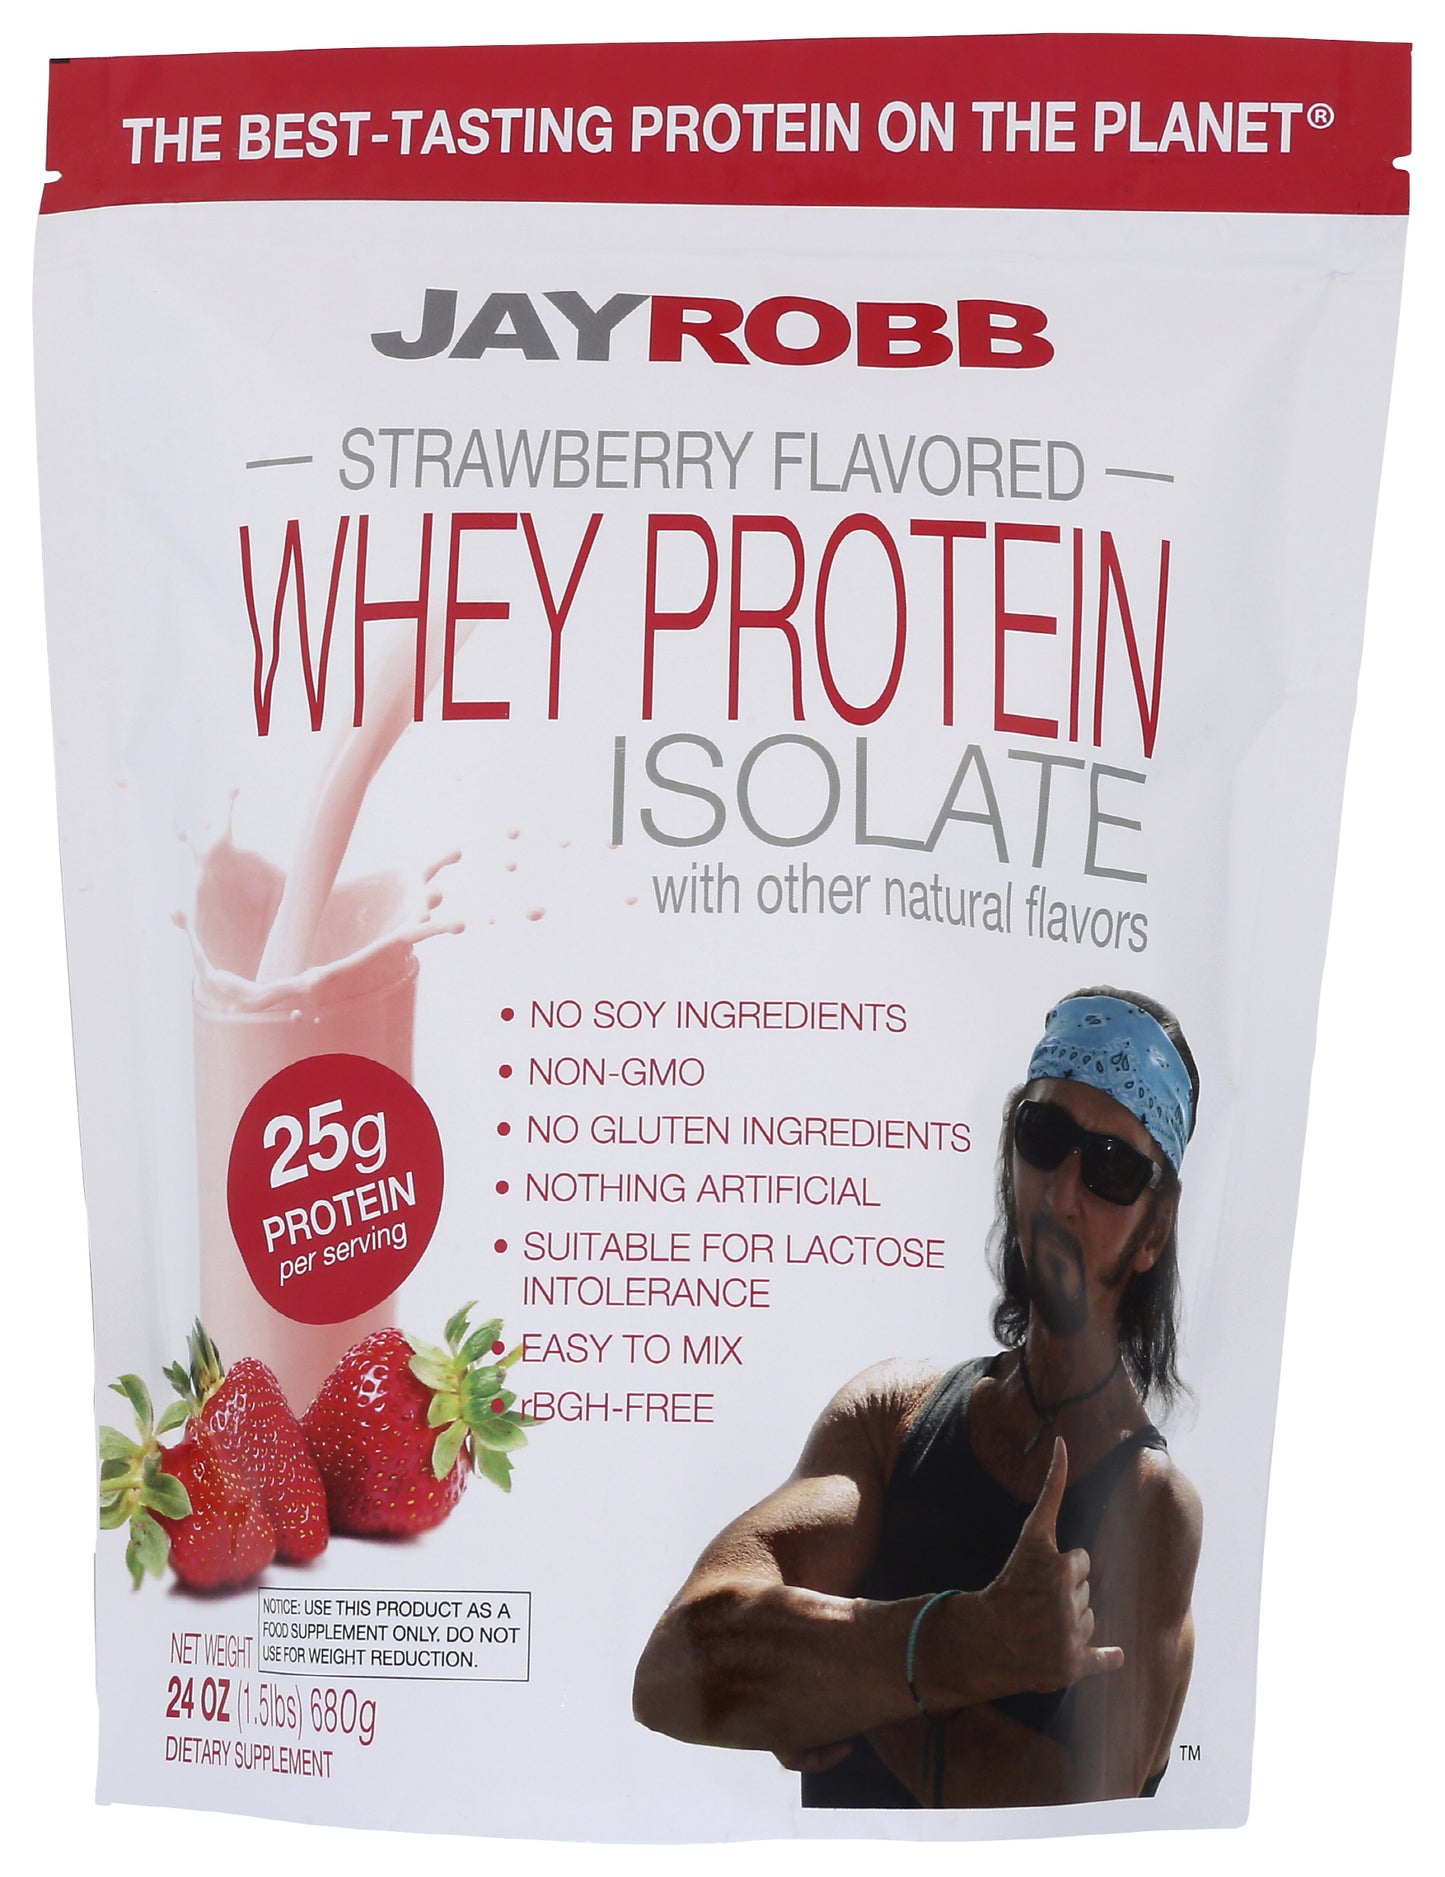 Jay Robb Strawberry Flavored Whey Protein Isolate 24 Oz Front of Bag